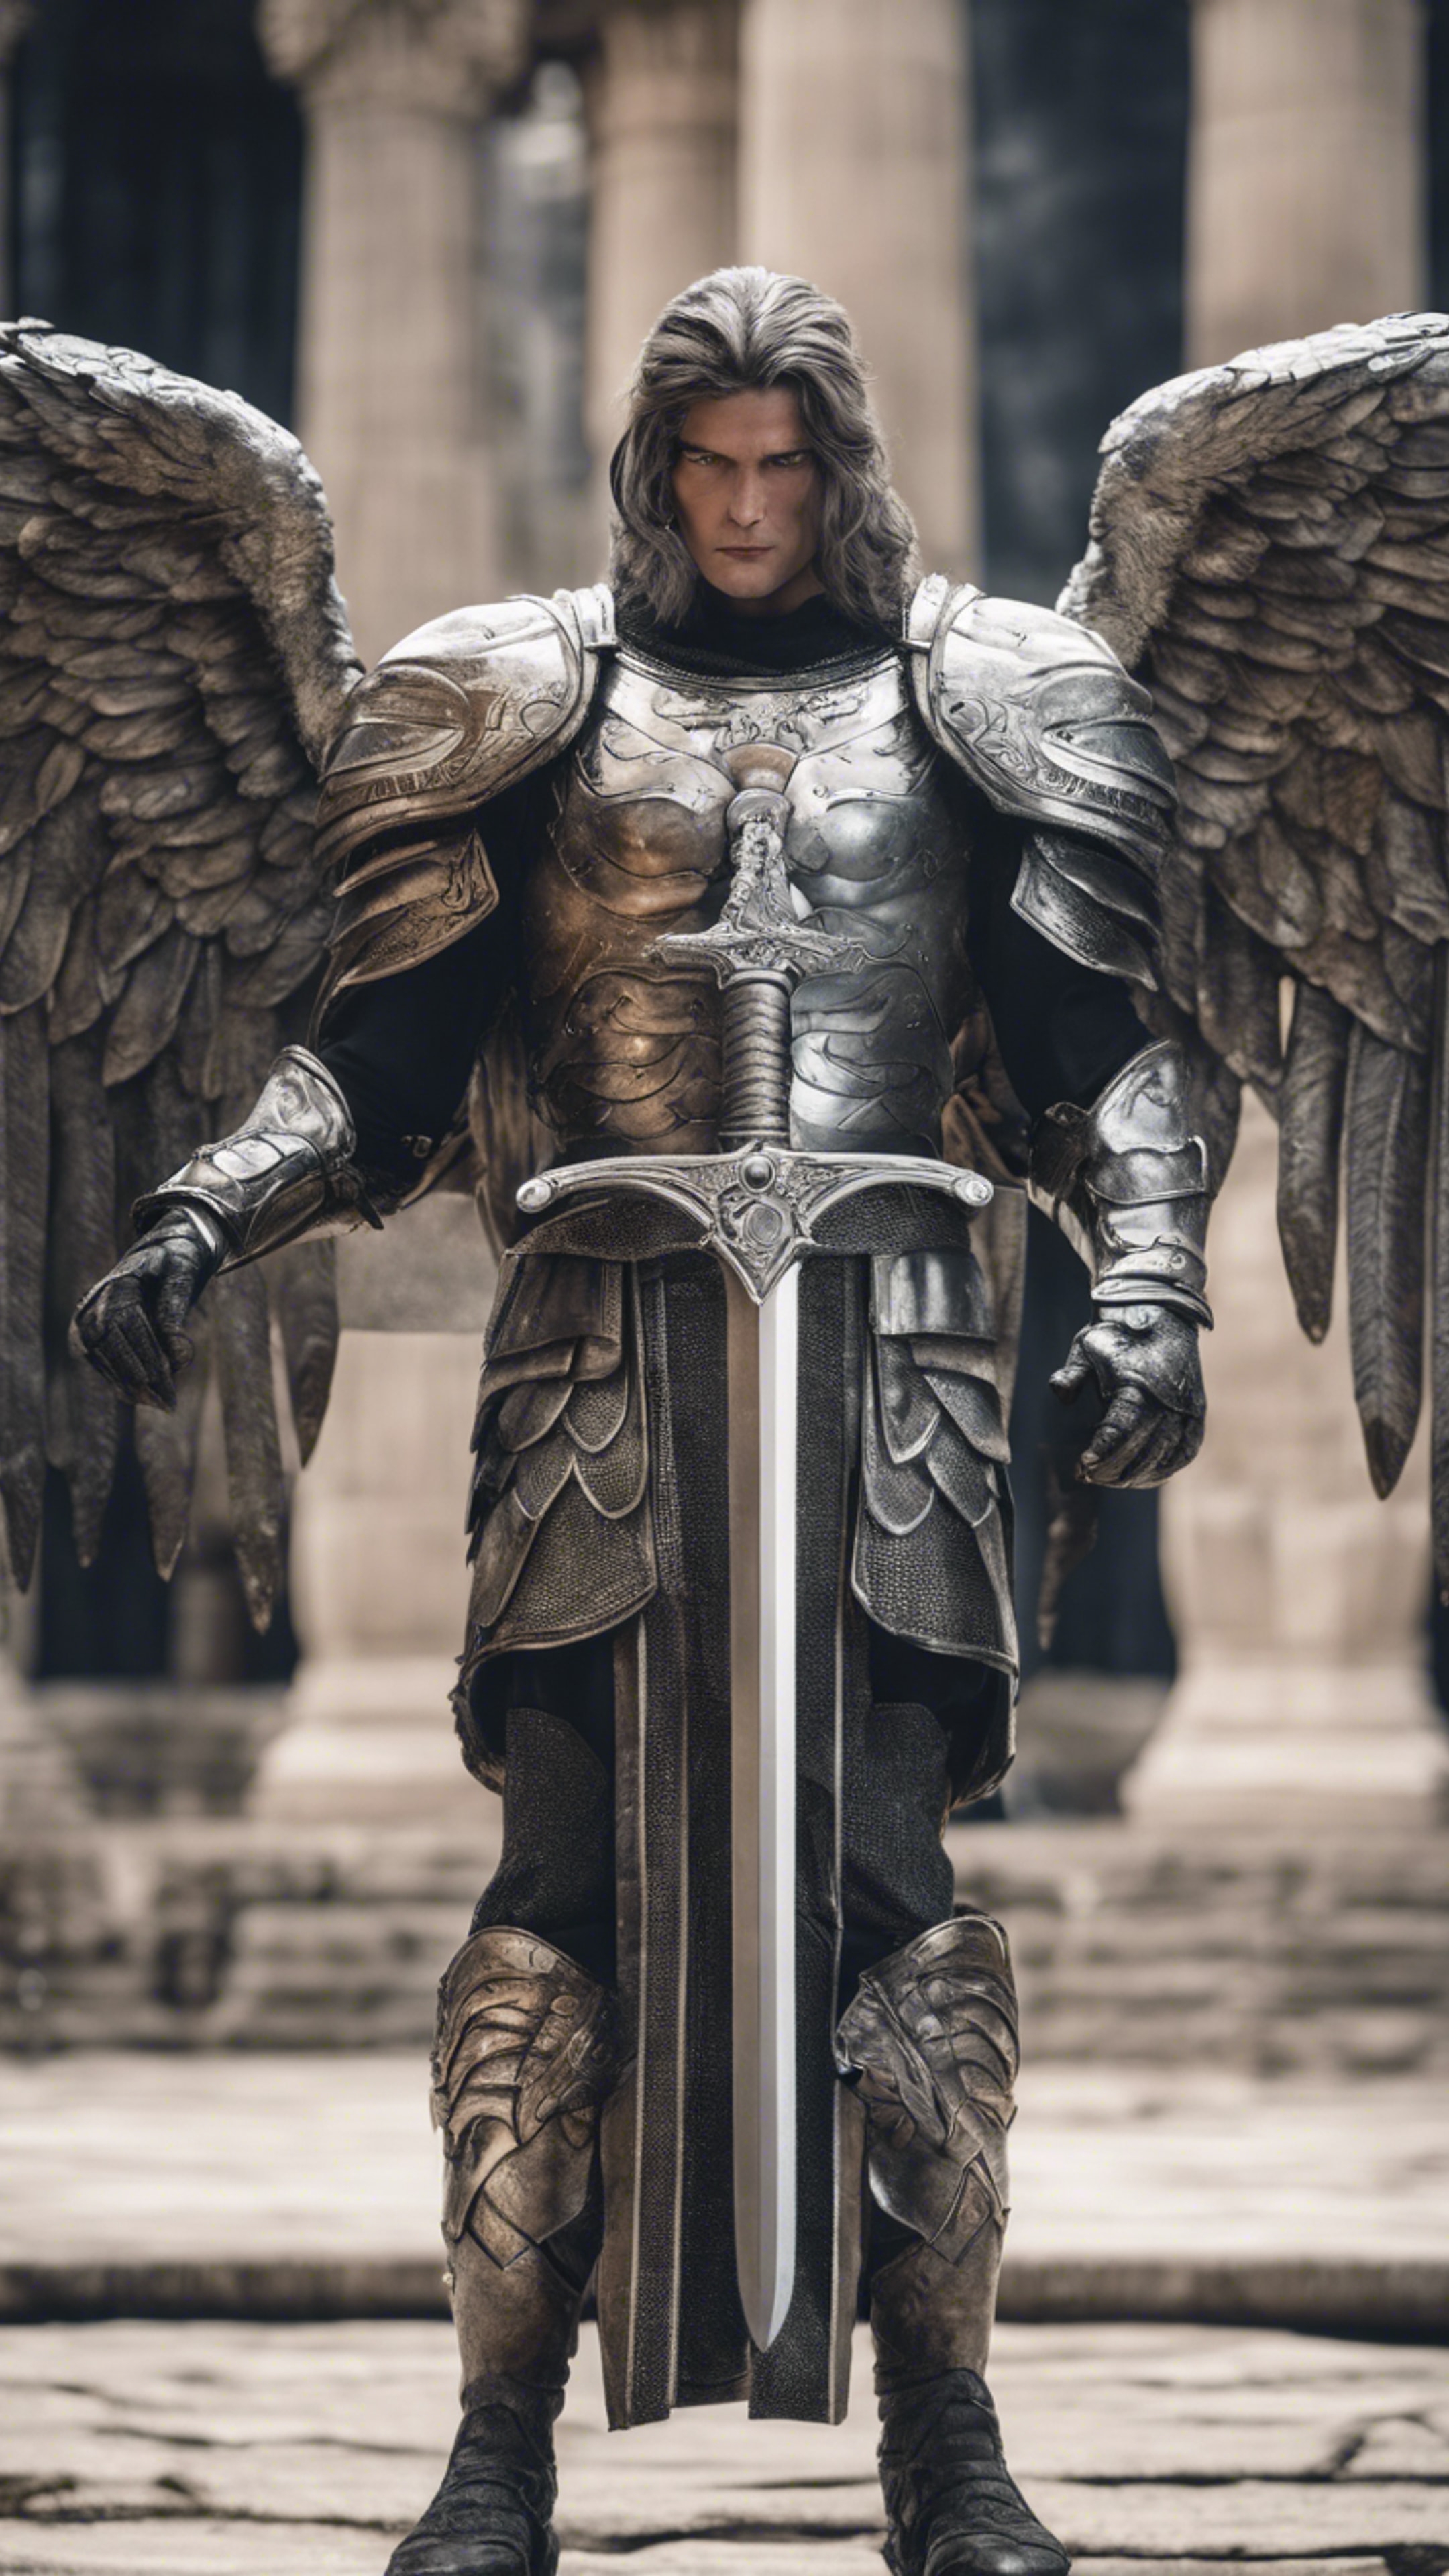 A strong archangel with a great silver sword in battle stance.壁紙[1419cc1cb5fd40c69a58]